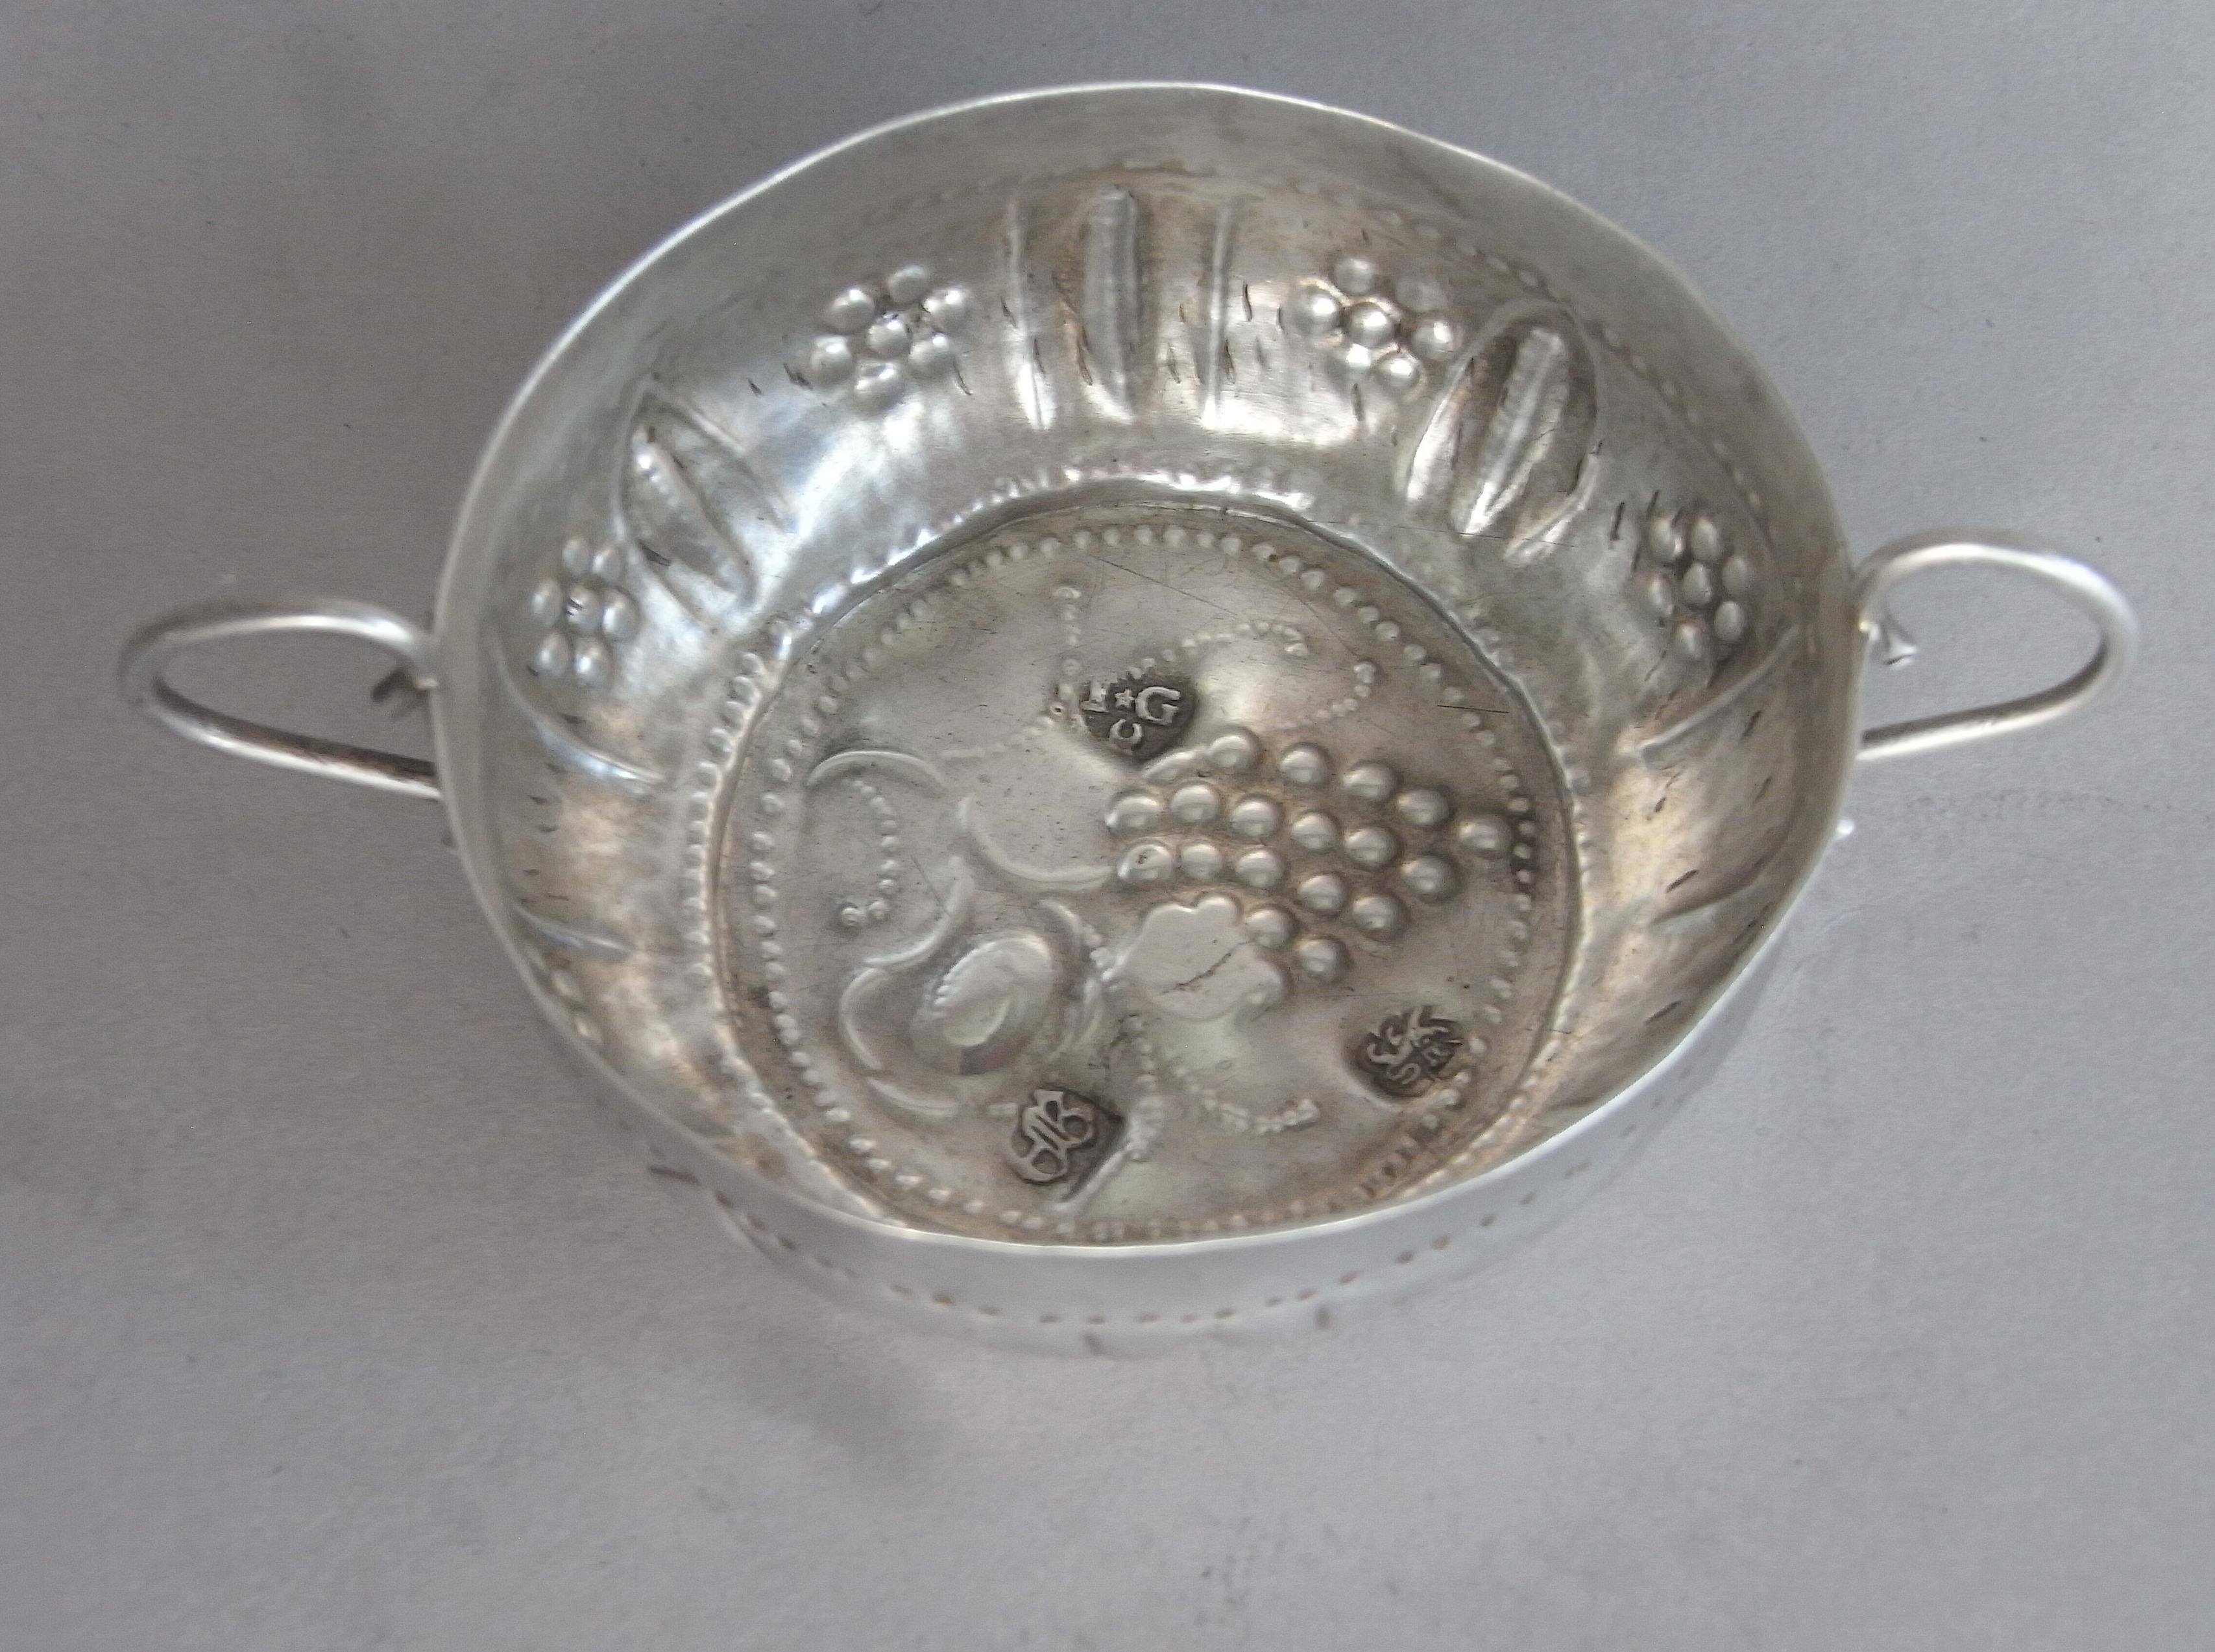 The wine taster stands on a narrow circular foot and has slightly baluster sides, and everted rim. The sides are decorated with punch bead bands, as well as stylized flower heads and foliate spears. This example has wirework 